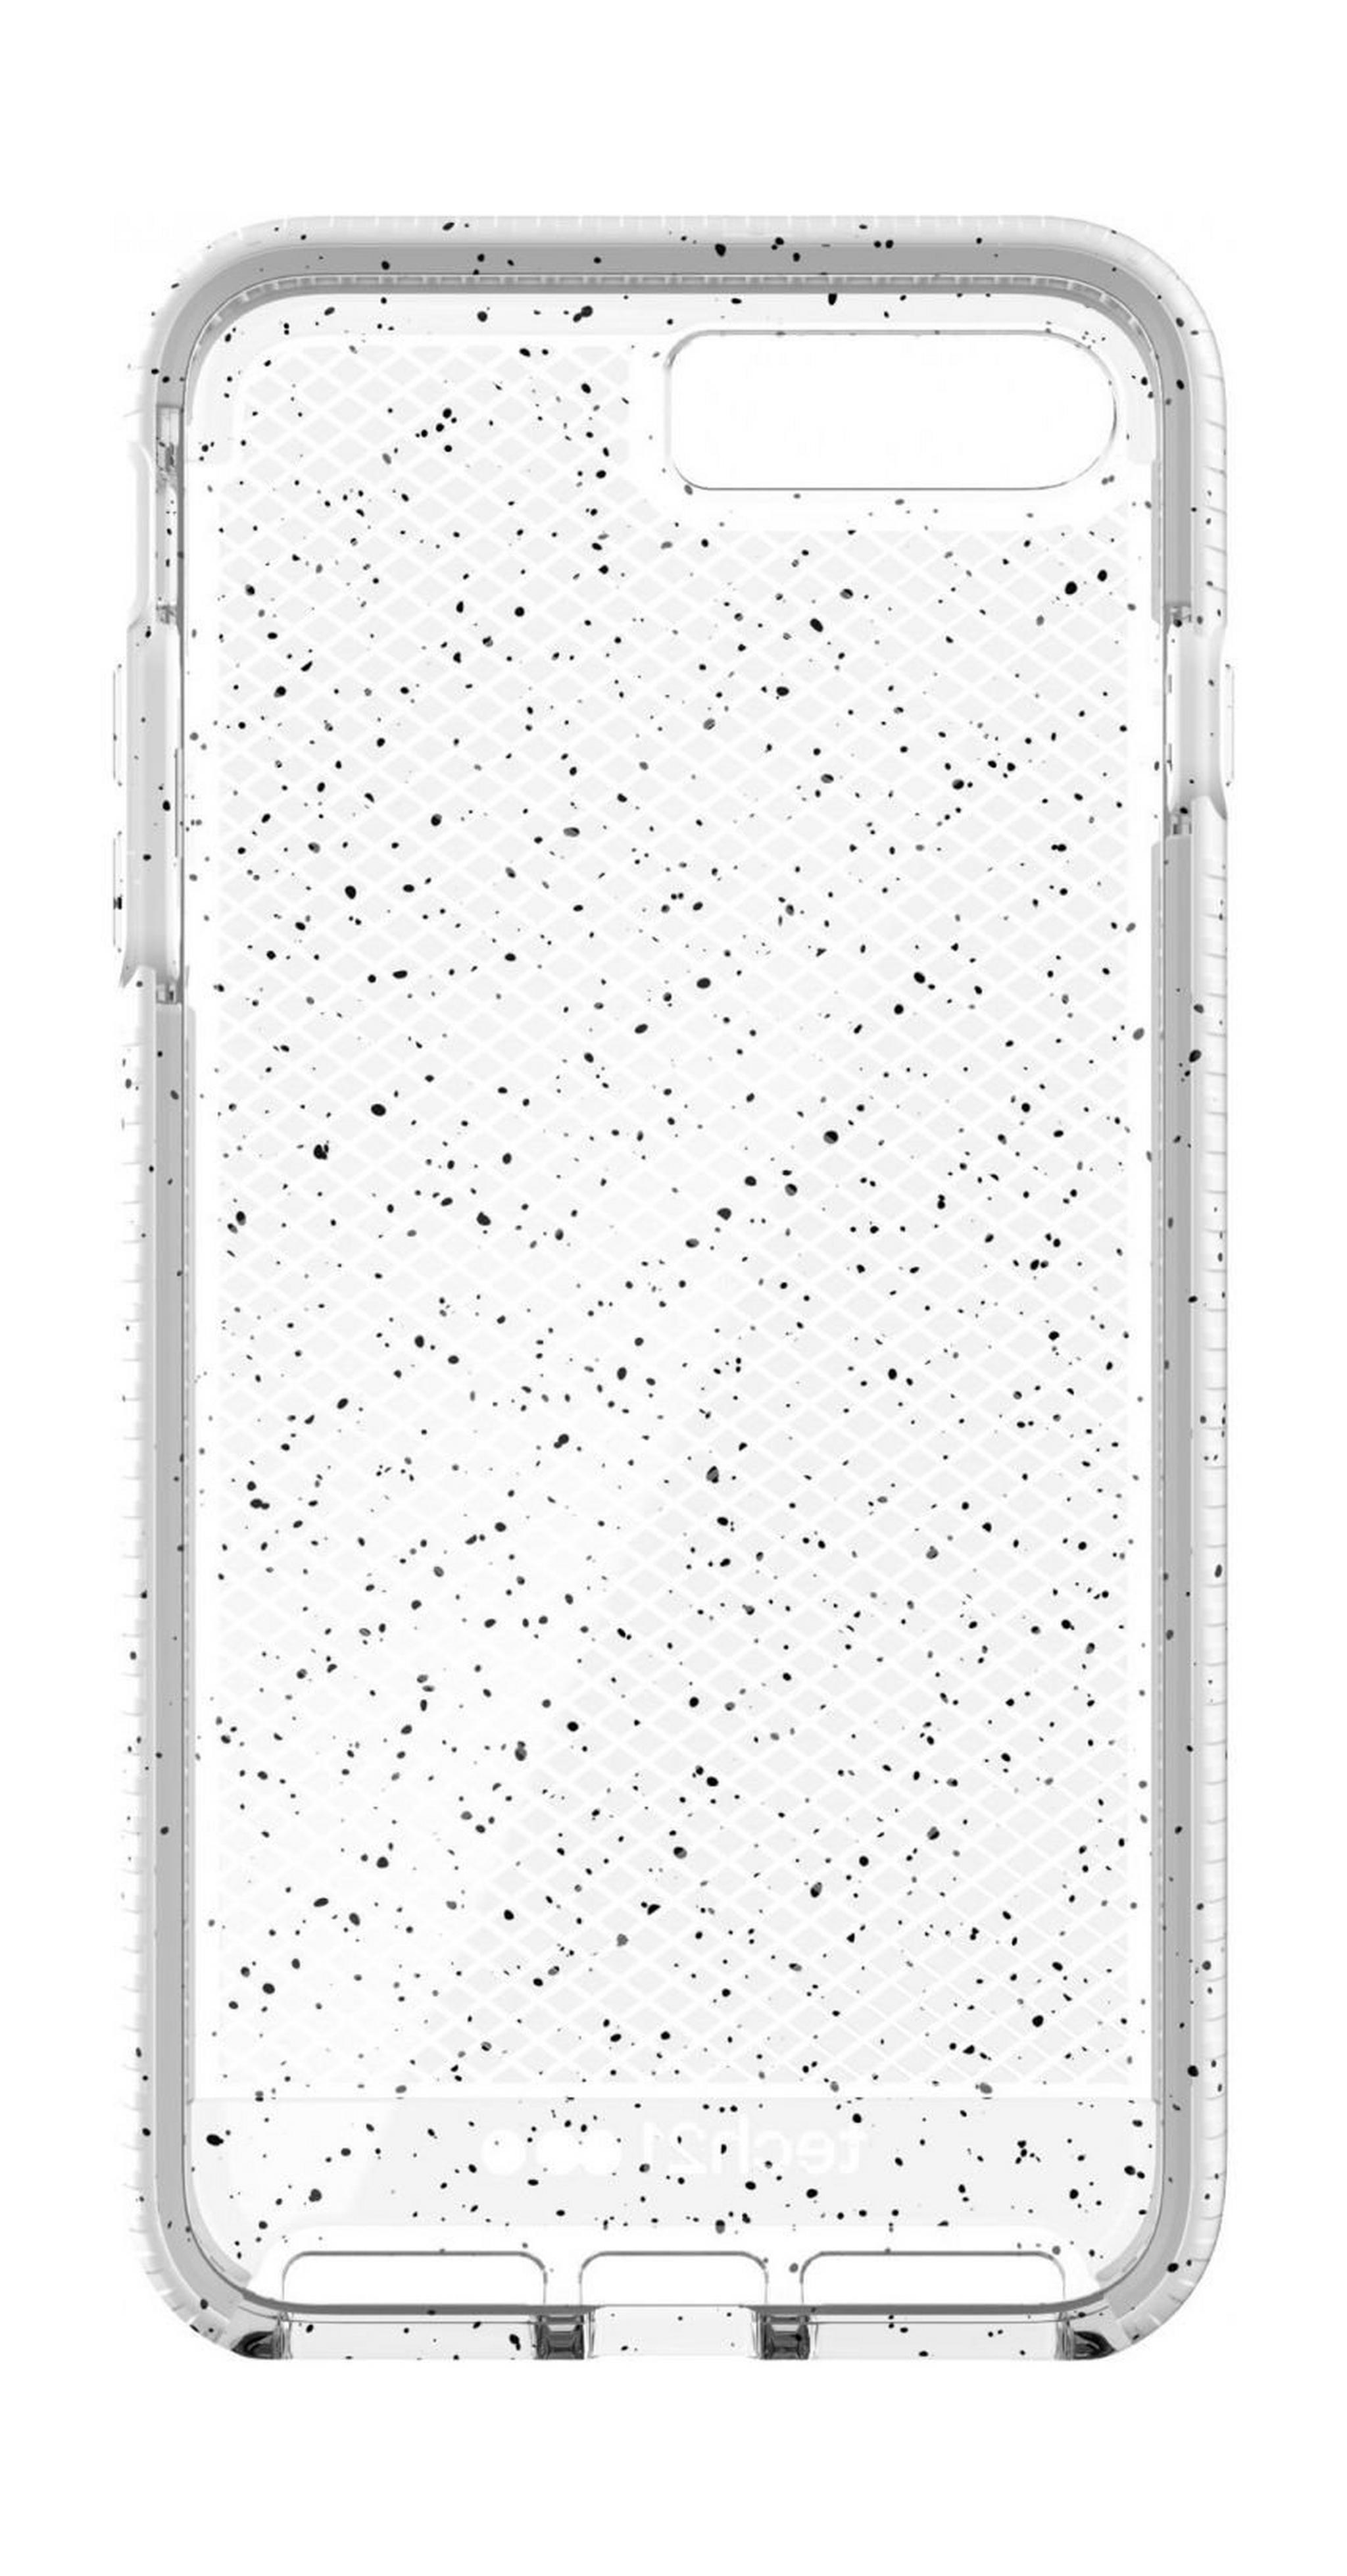 Tech21 Evo Check Active Edition Case for iPhone 7 Plus (T21-5543) - White